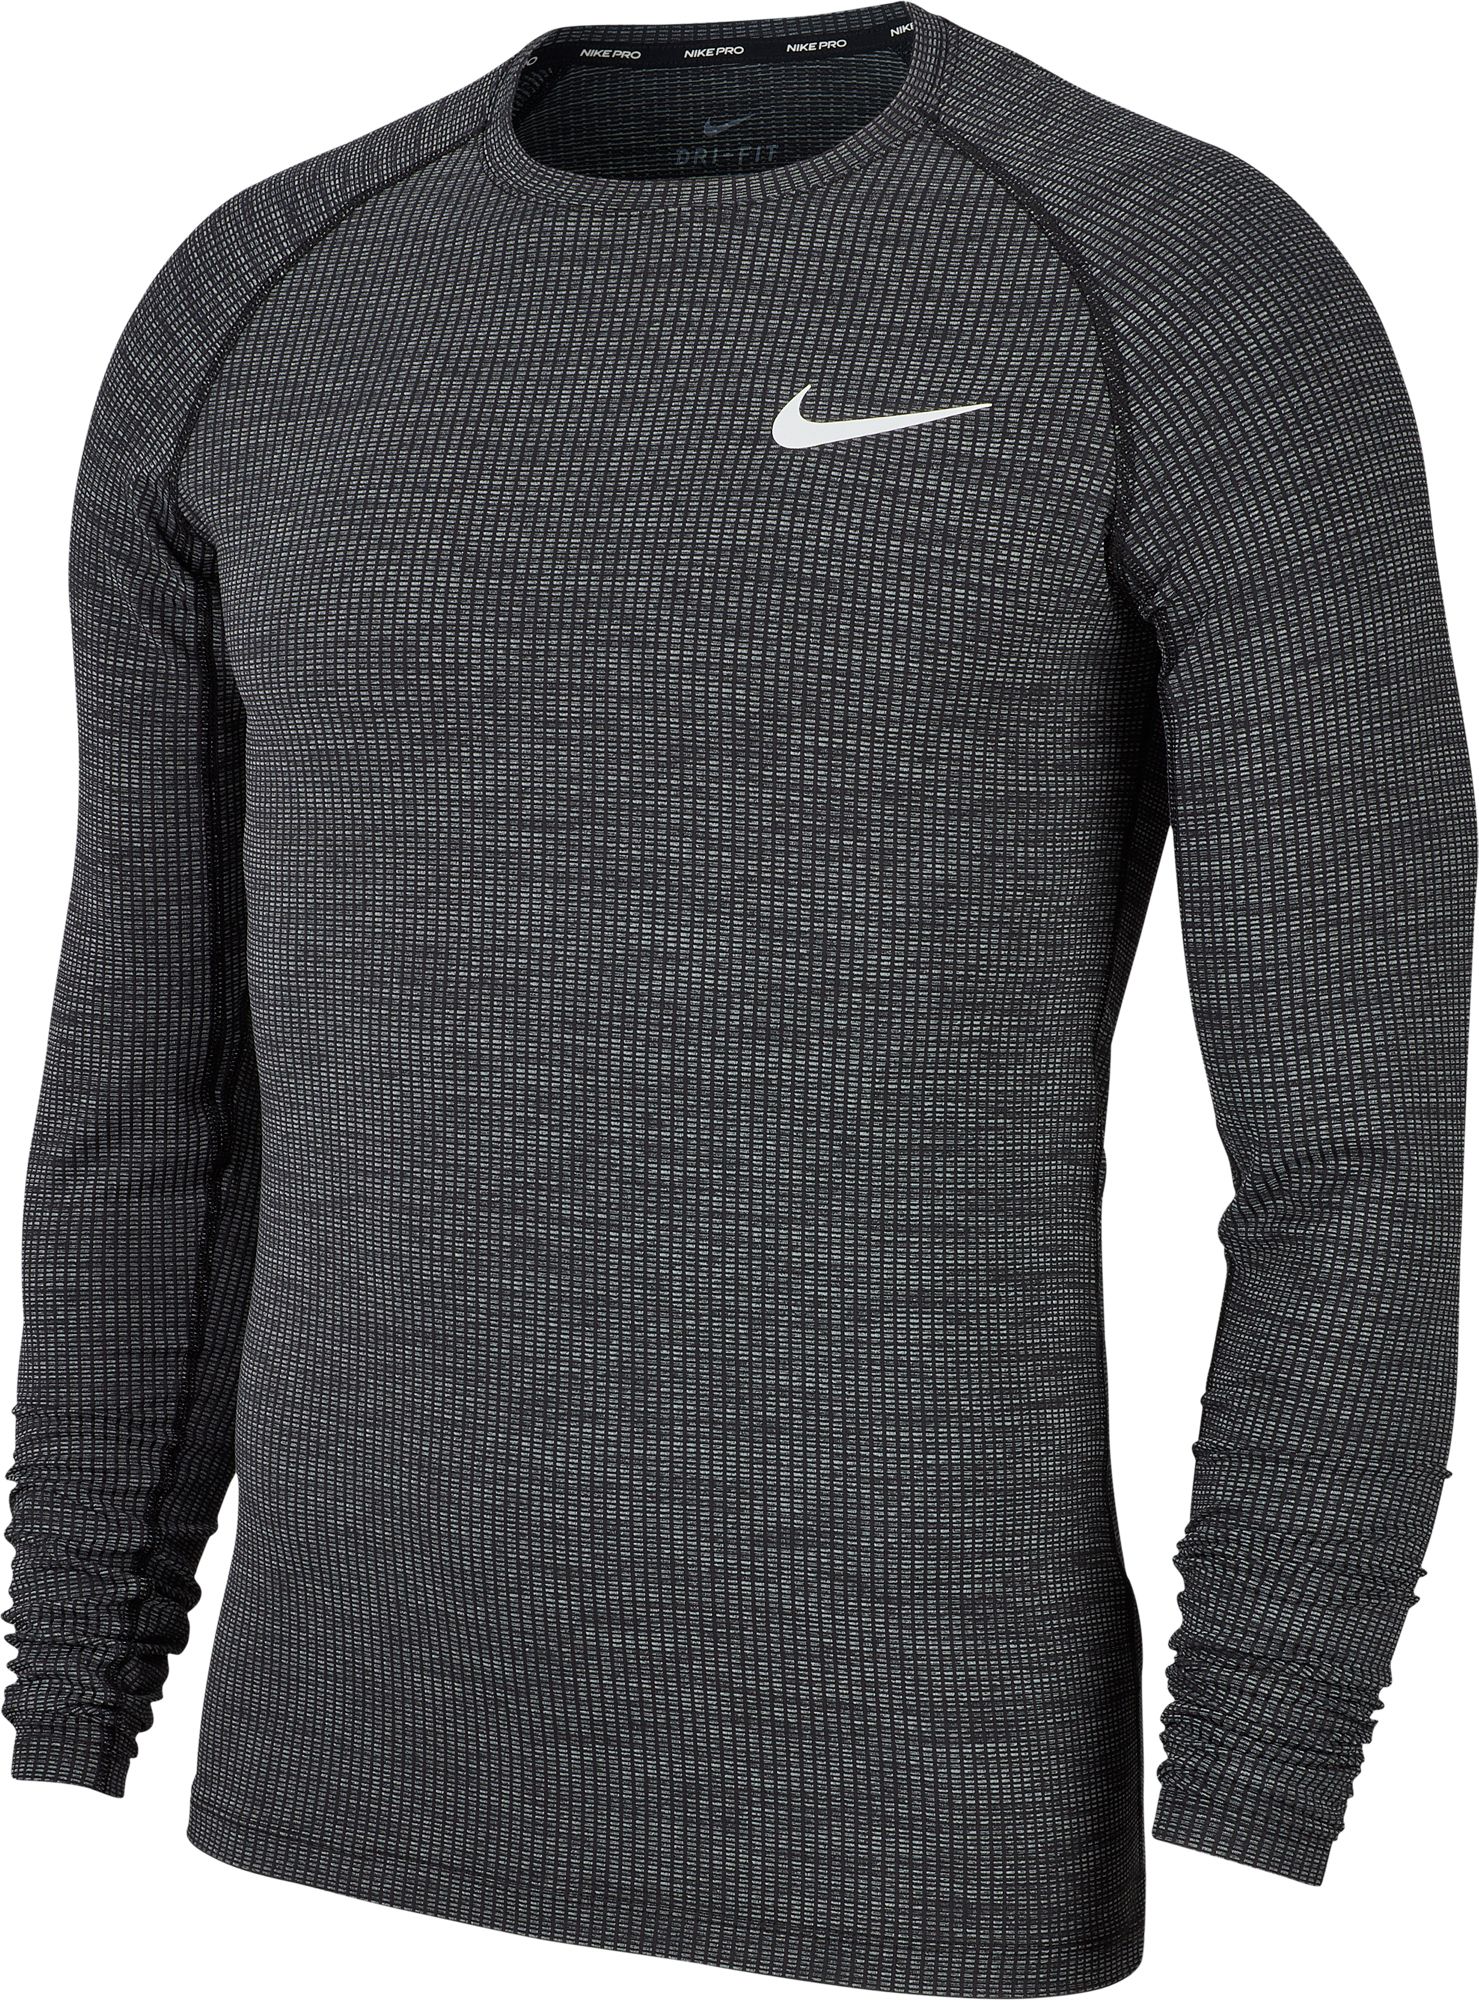 Workout Shirts for Men | Best Price Guarantee at DICK'S